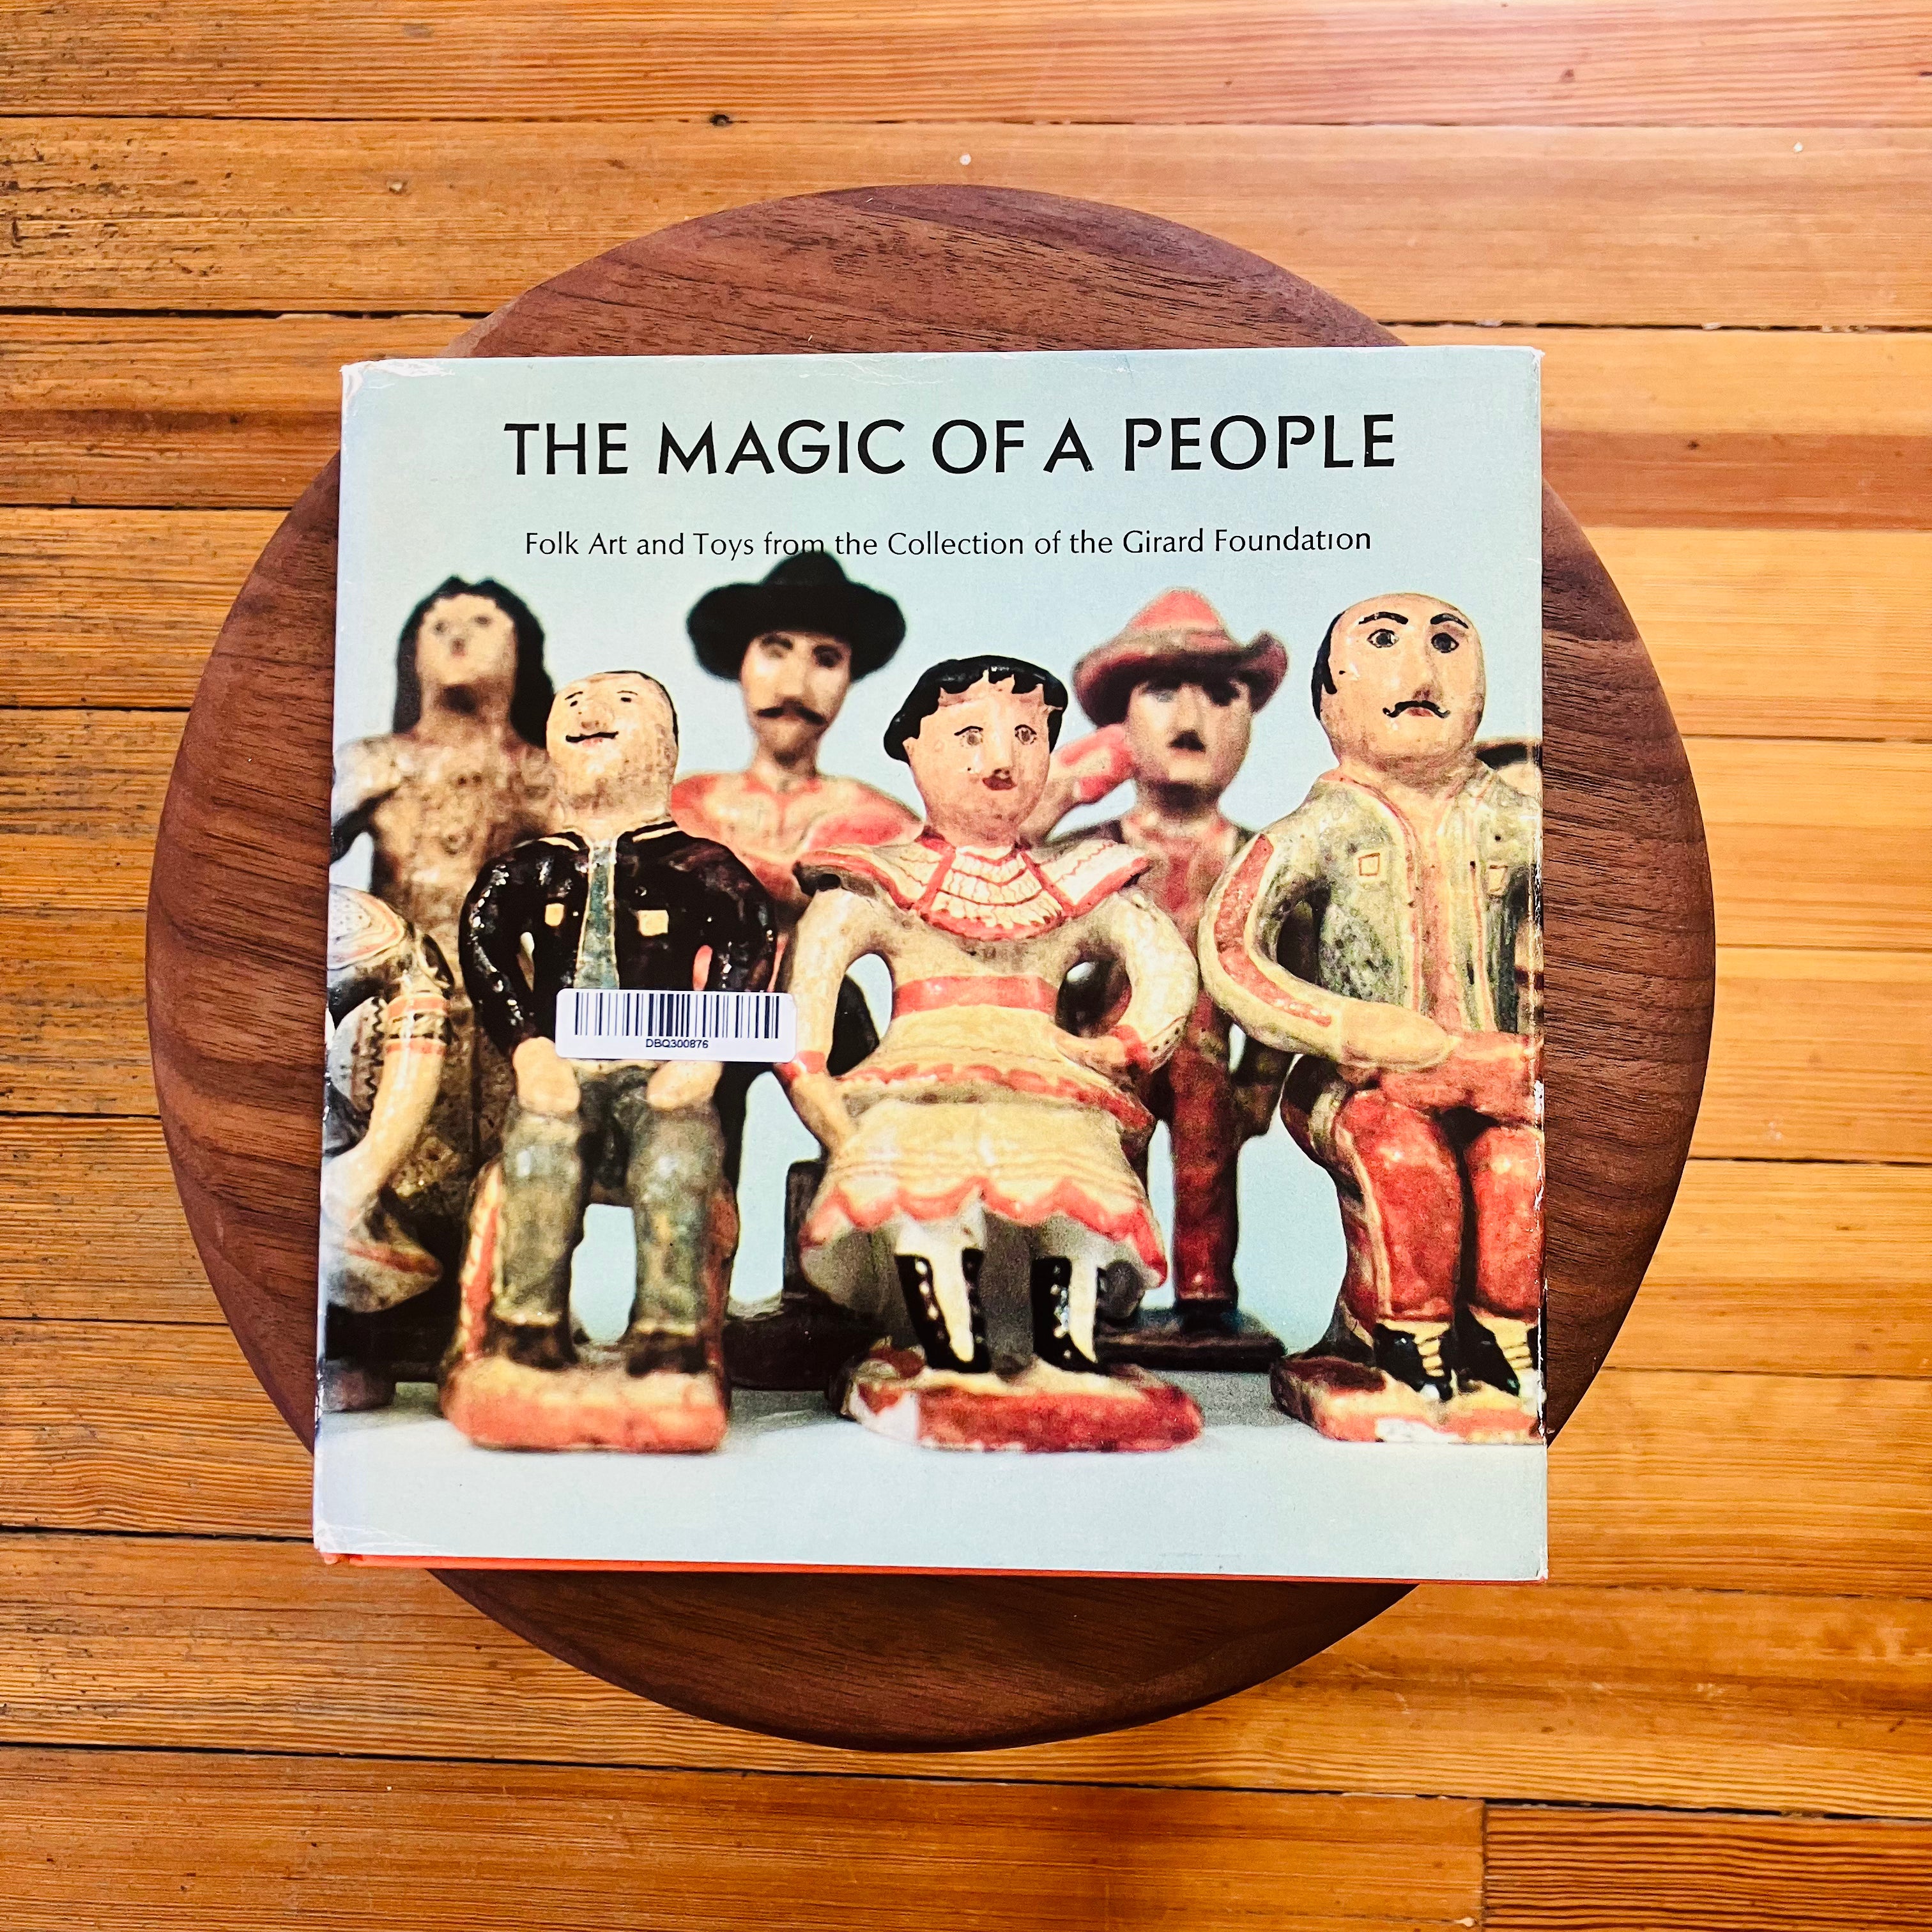 The Magic of a People: Folk Art and Toys from the Collection of the Girard Foundation